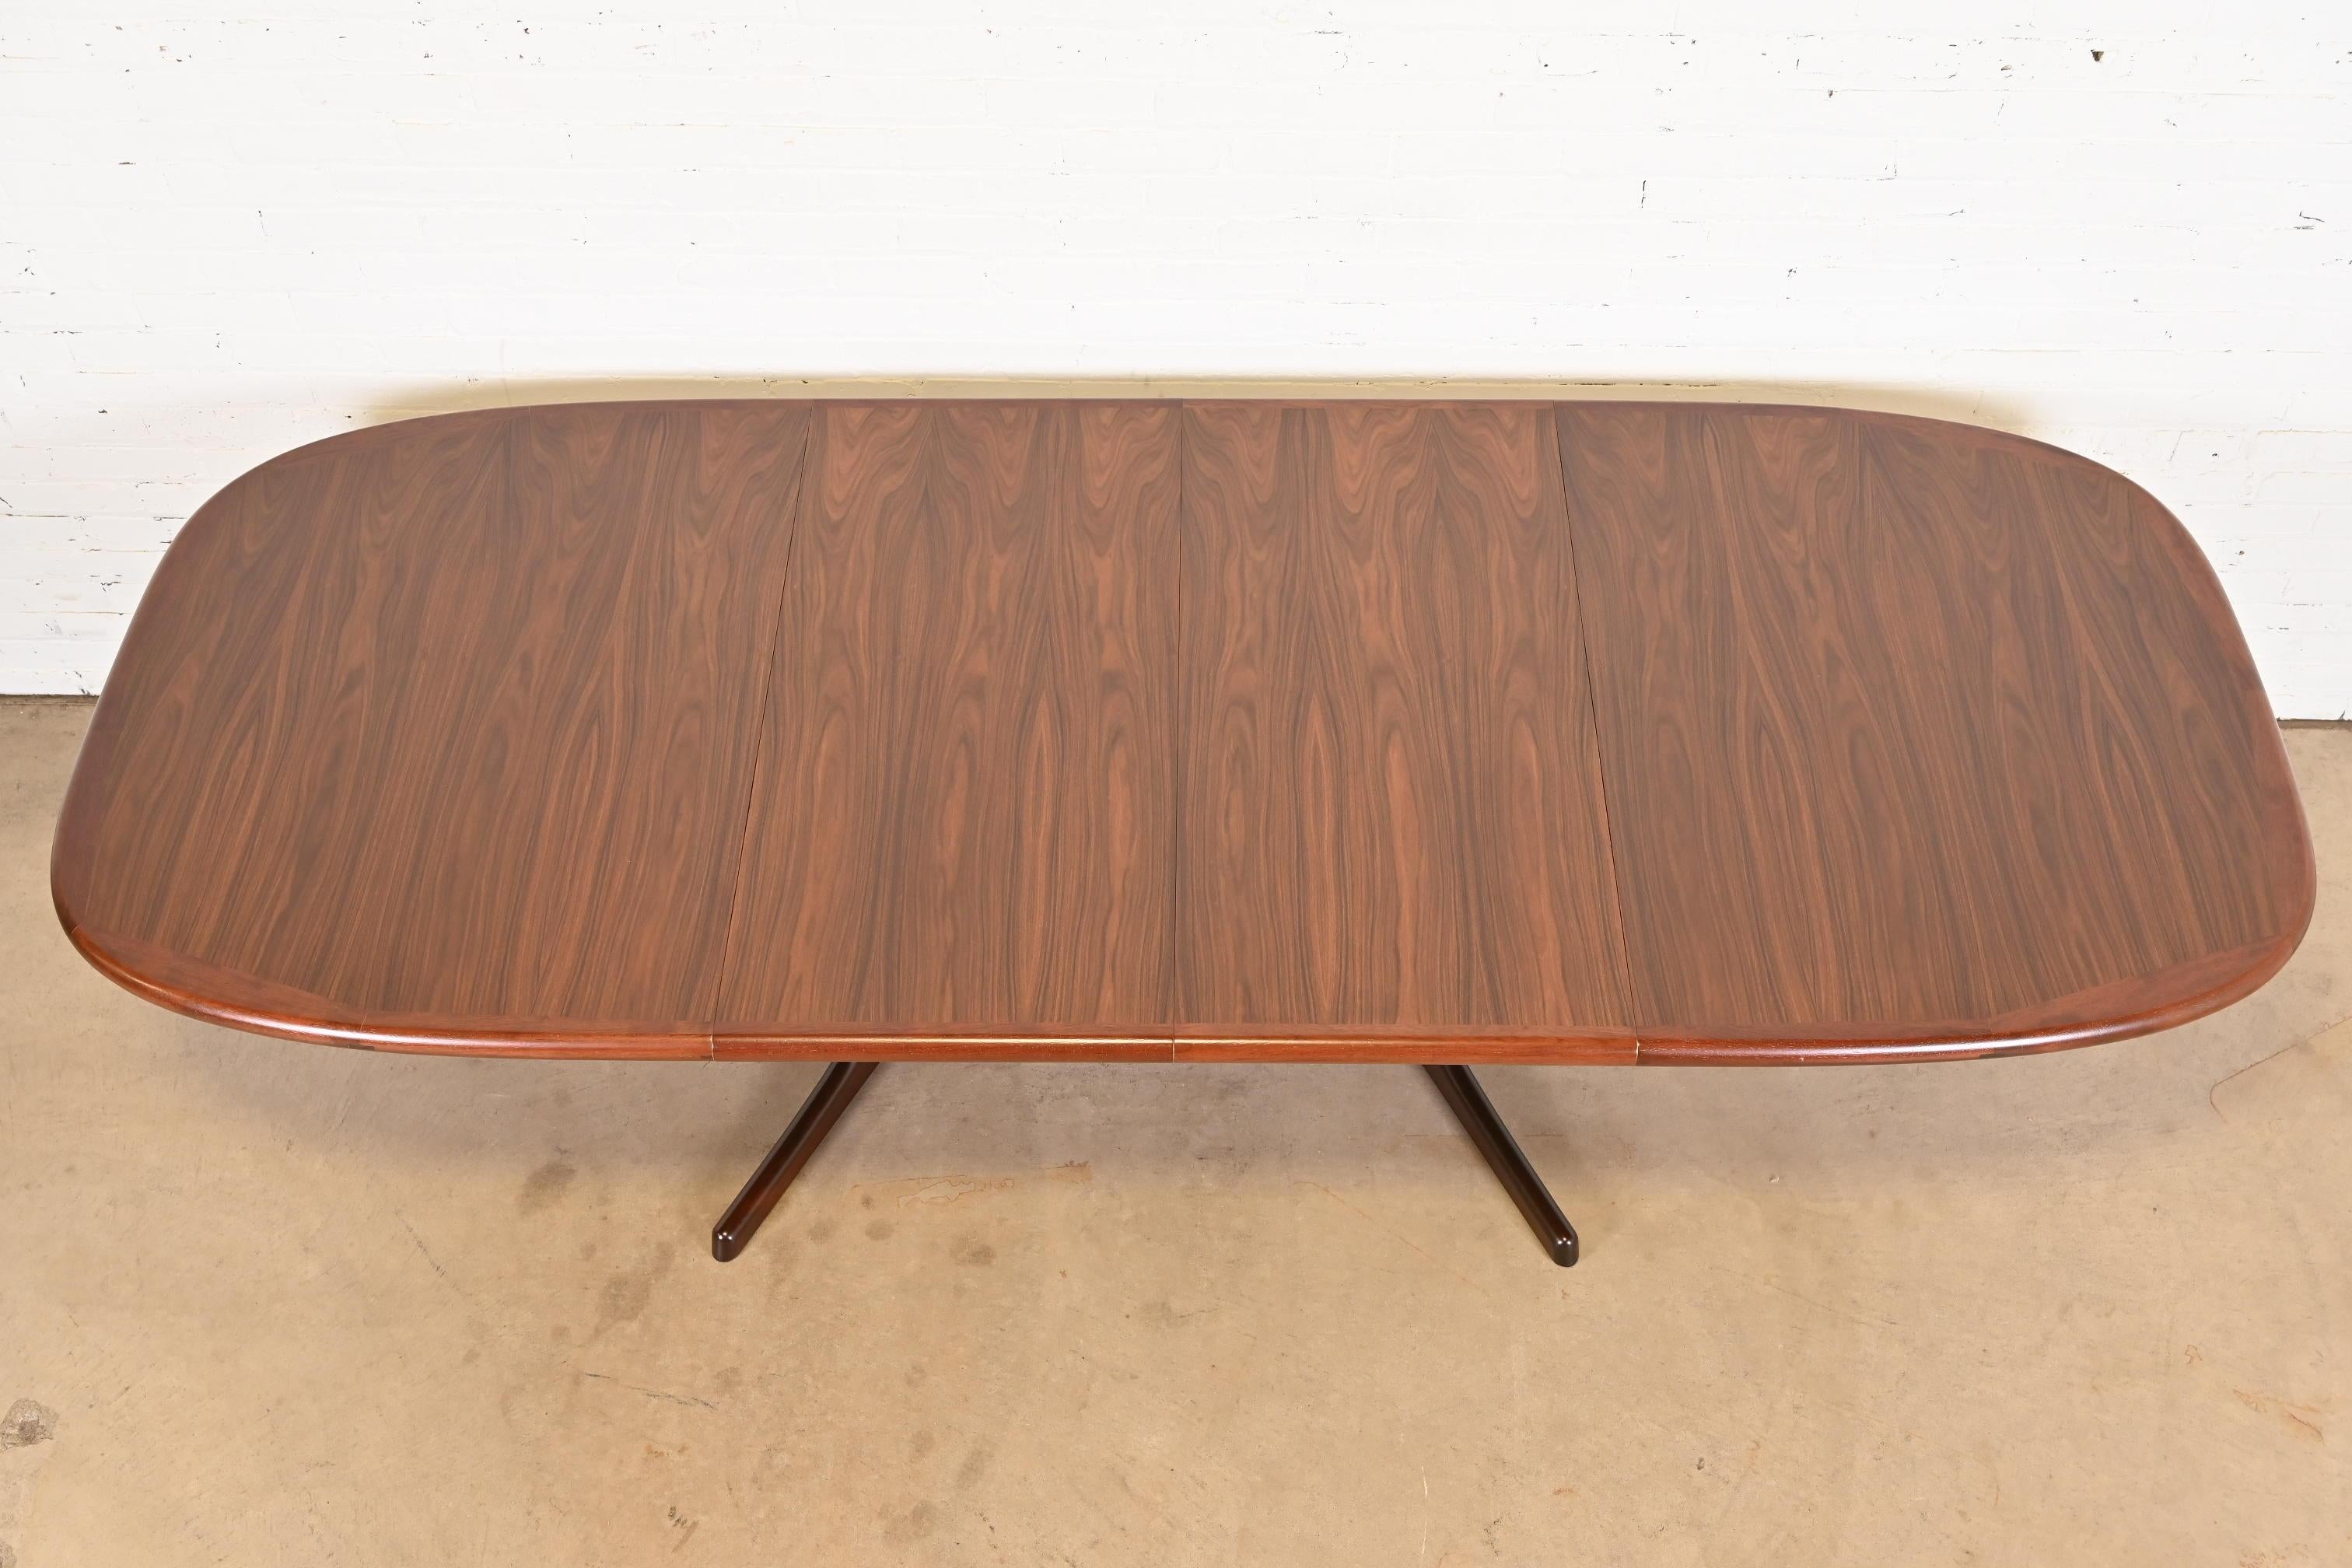 Dyrlund Danish Modern Rosewood Pedestal Extension Dining Table, Newly Refinished For Sale 2